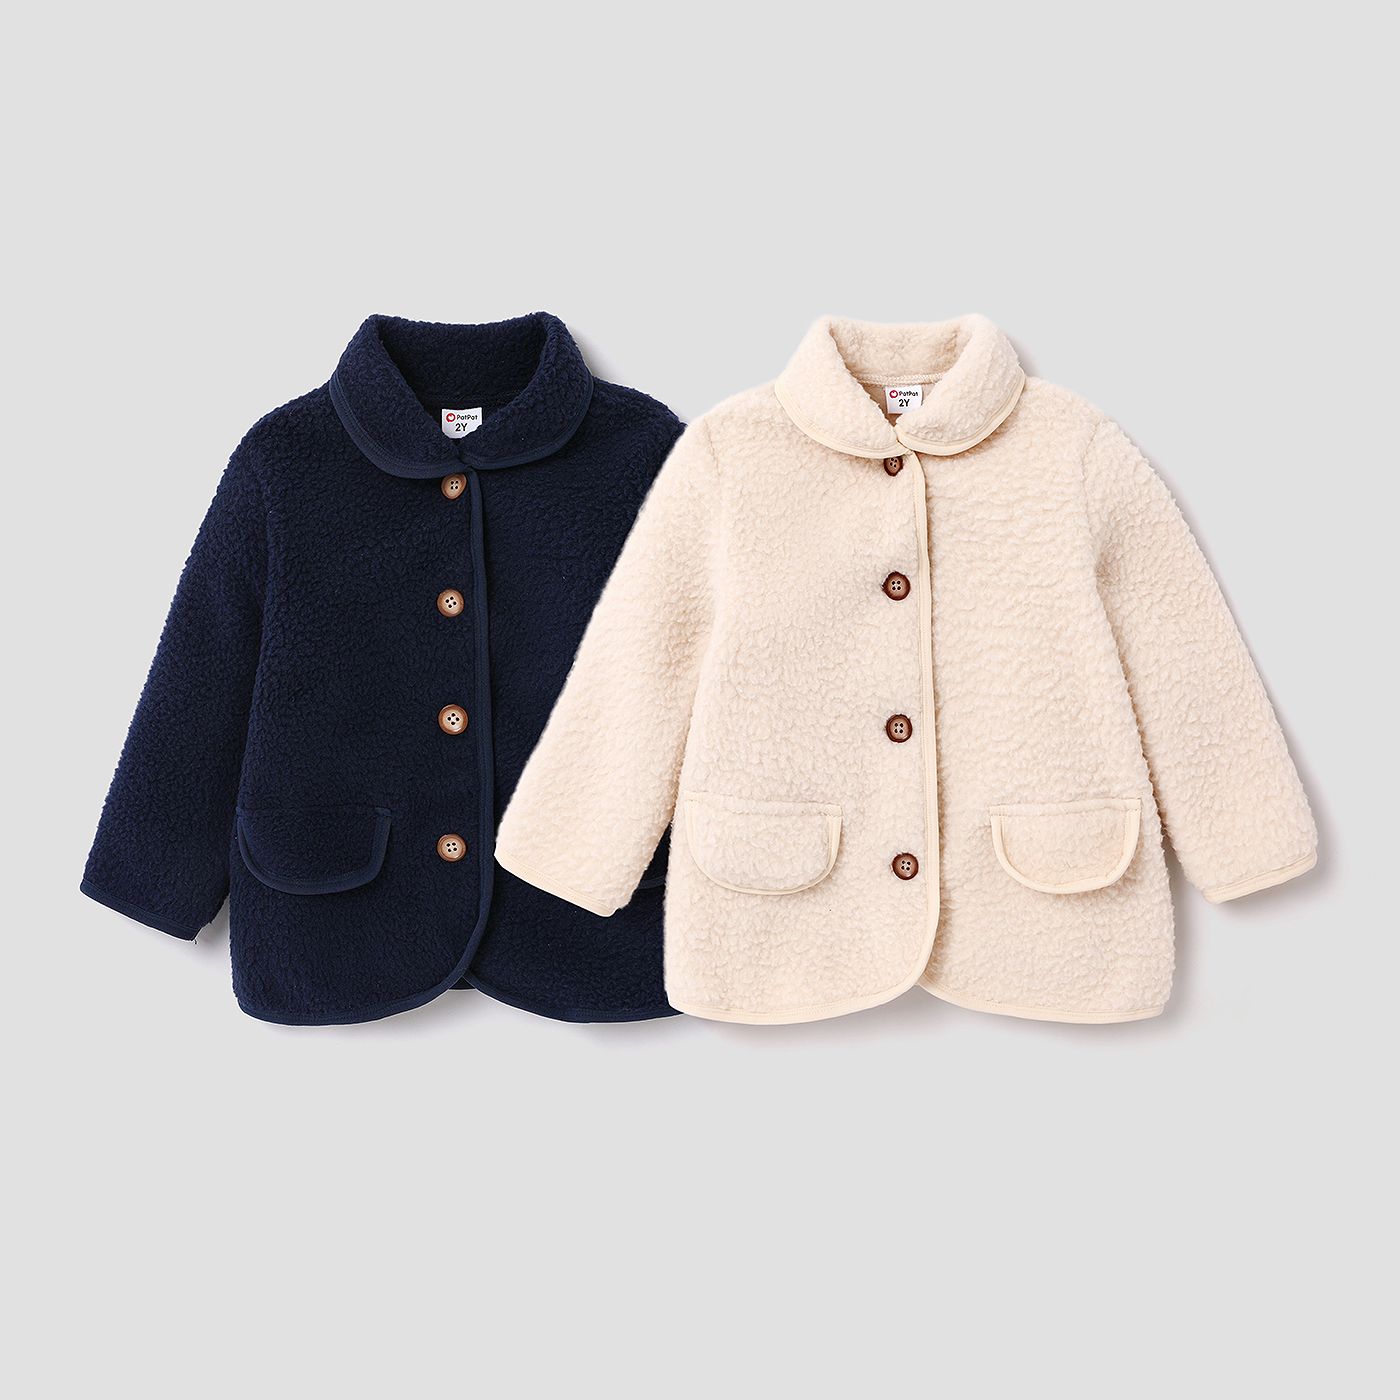 Toddler Boy/Girl Solid Button Casual Coat